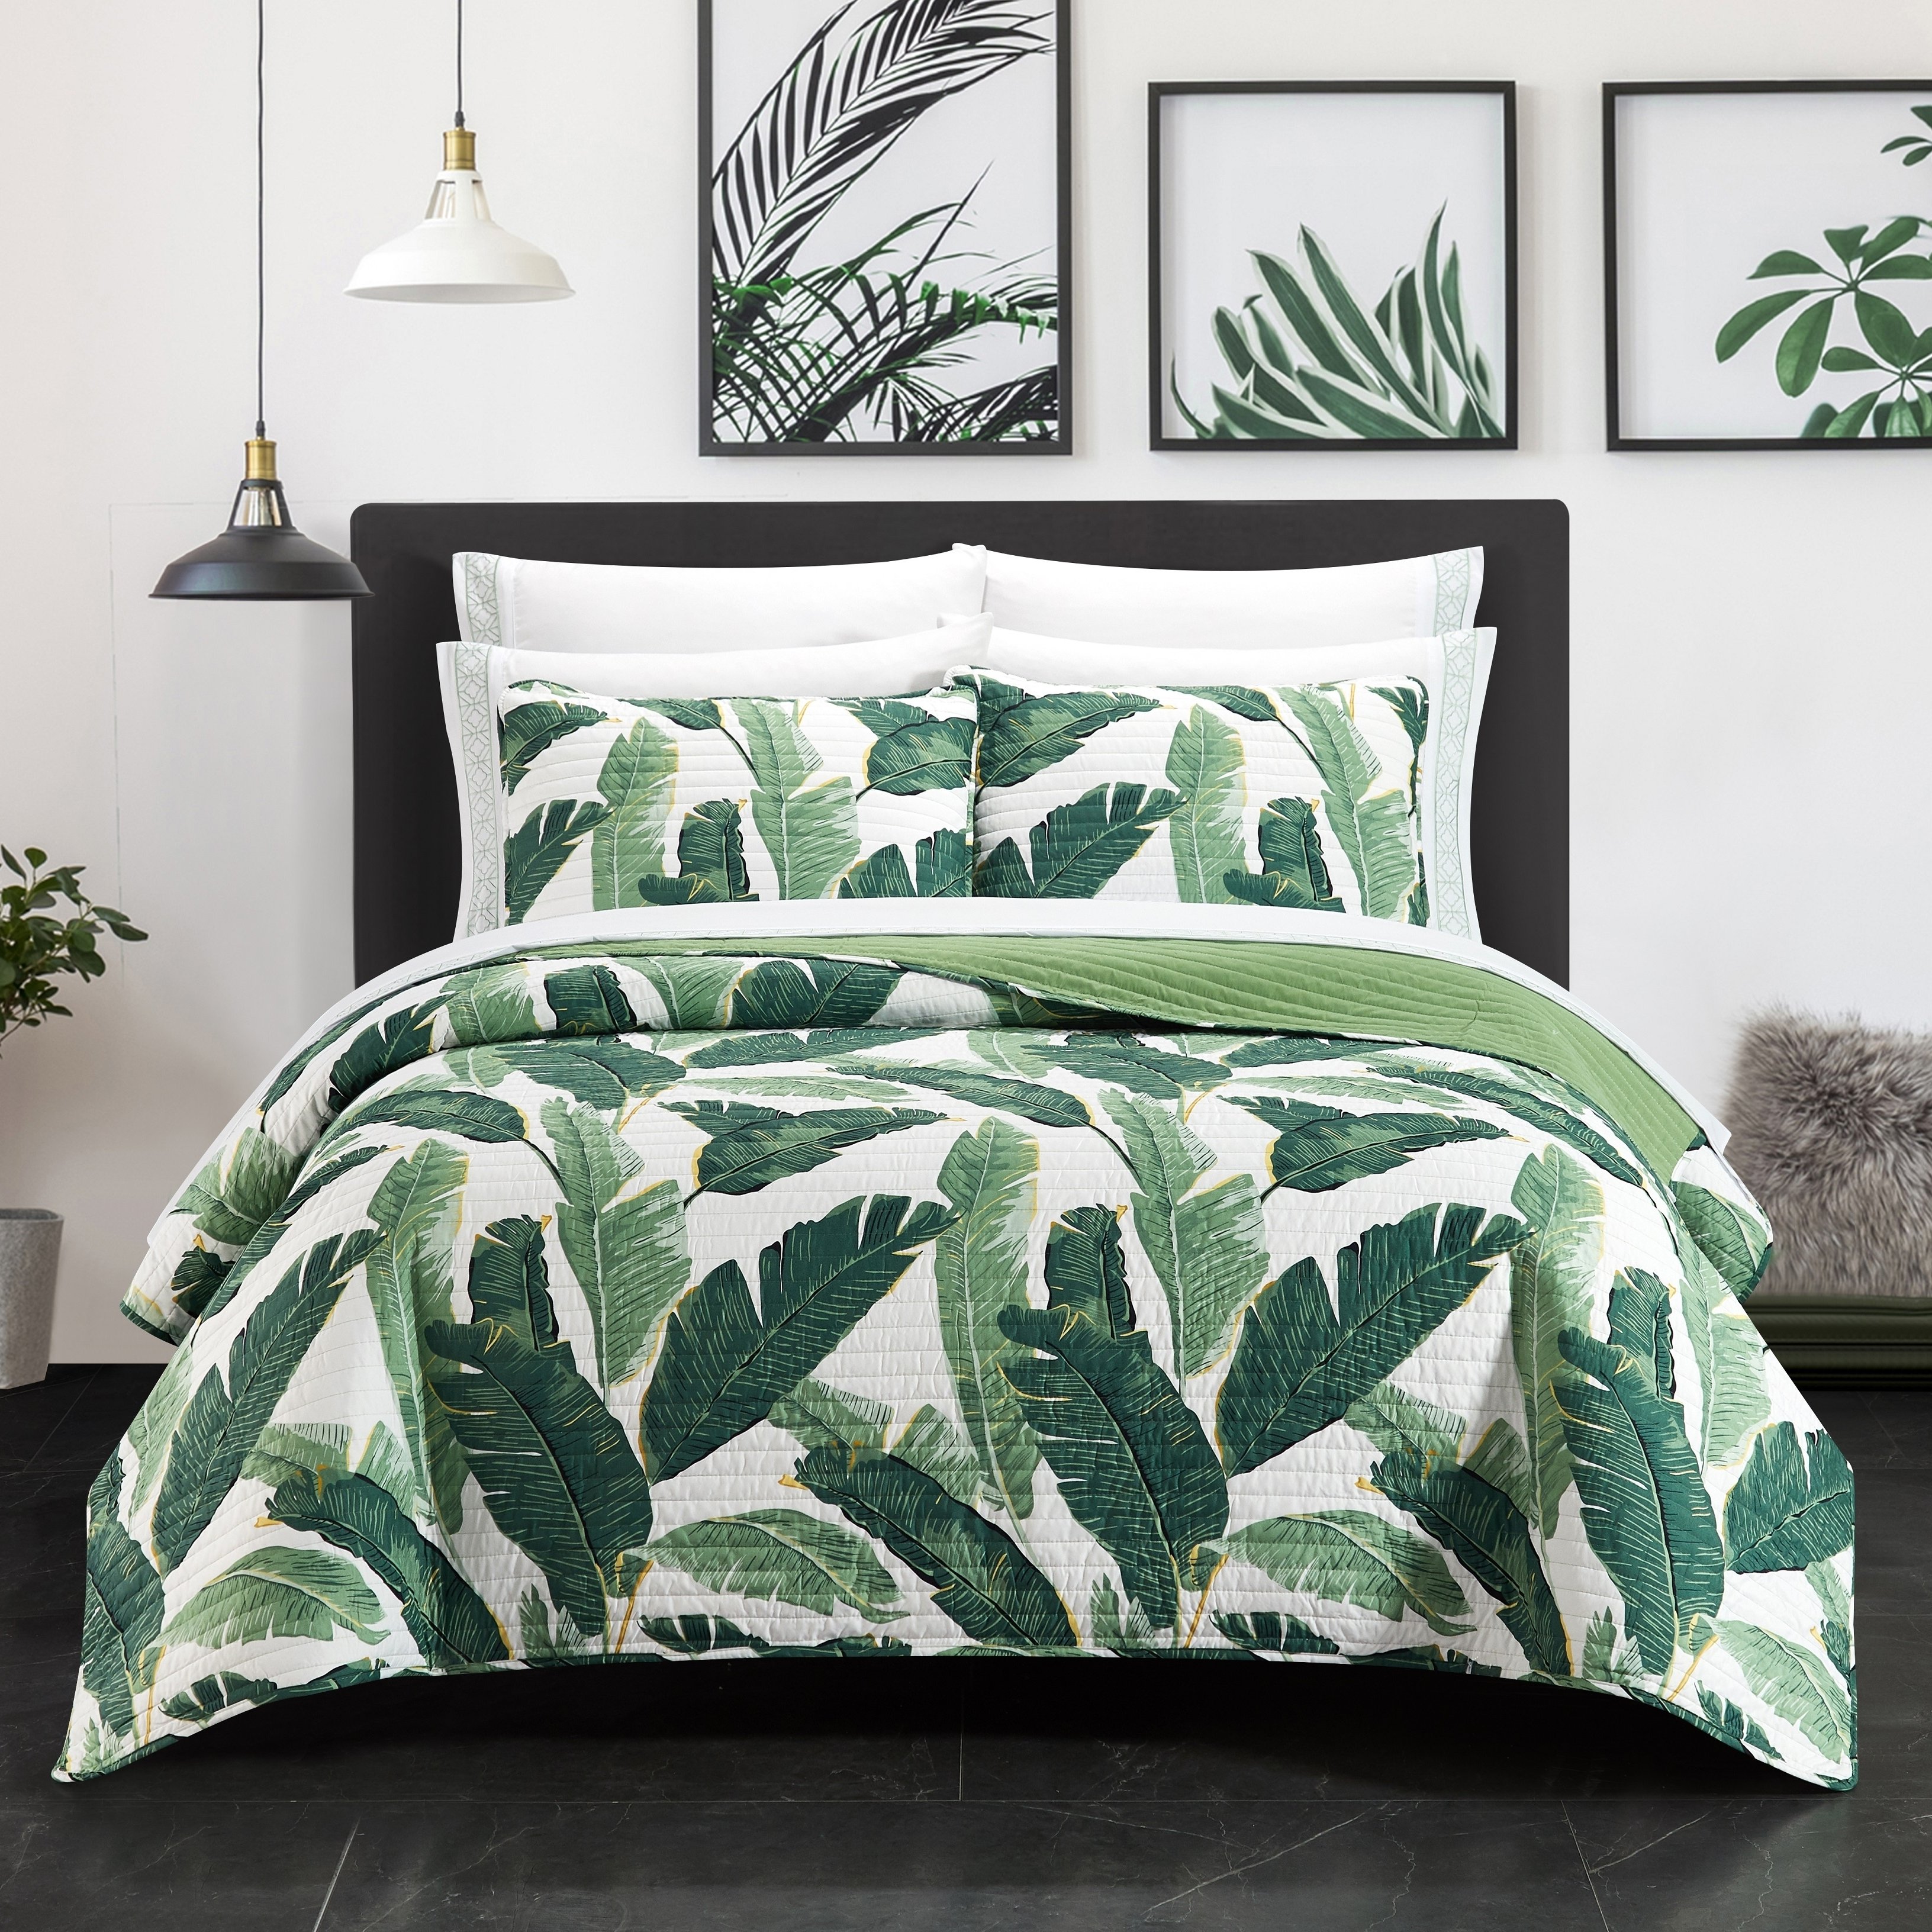 Palm Spring 9 Or 6 Piece Quilt Set Watercolor Floral Pattern Print Bed In A Bag - Green, Queen